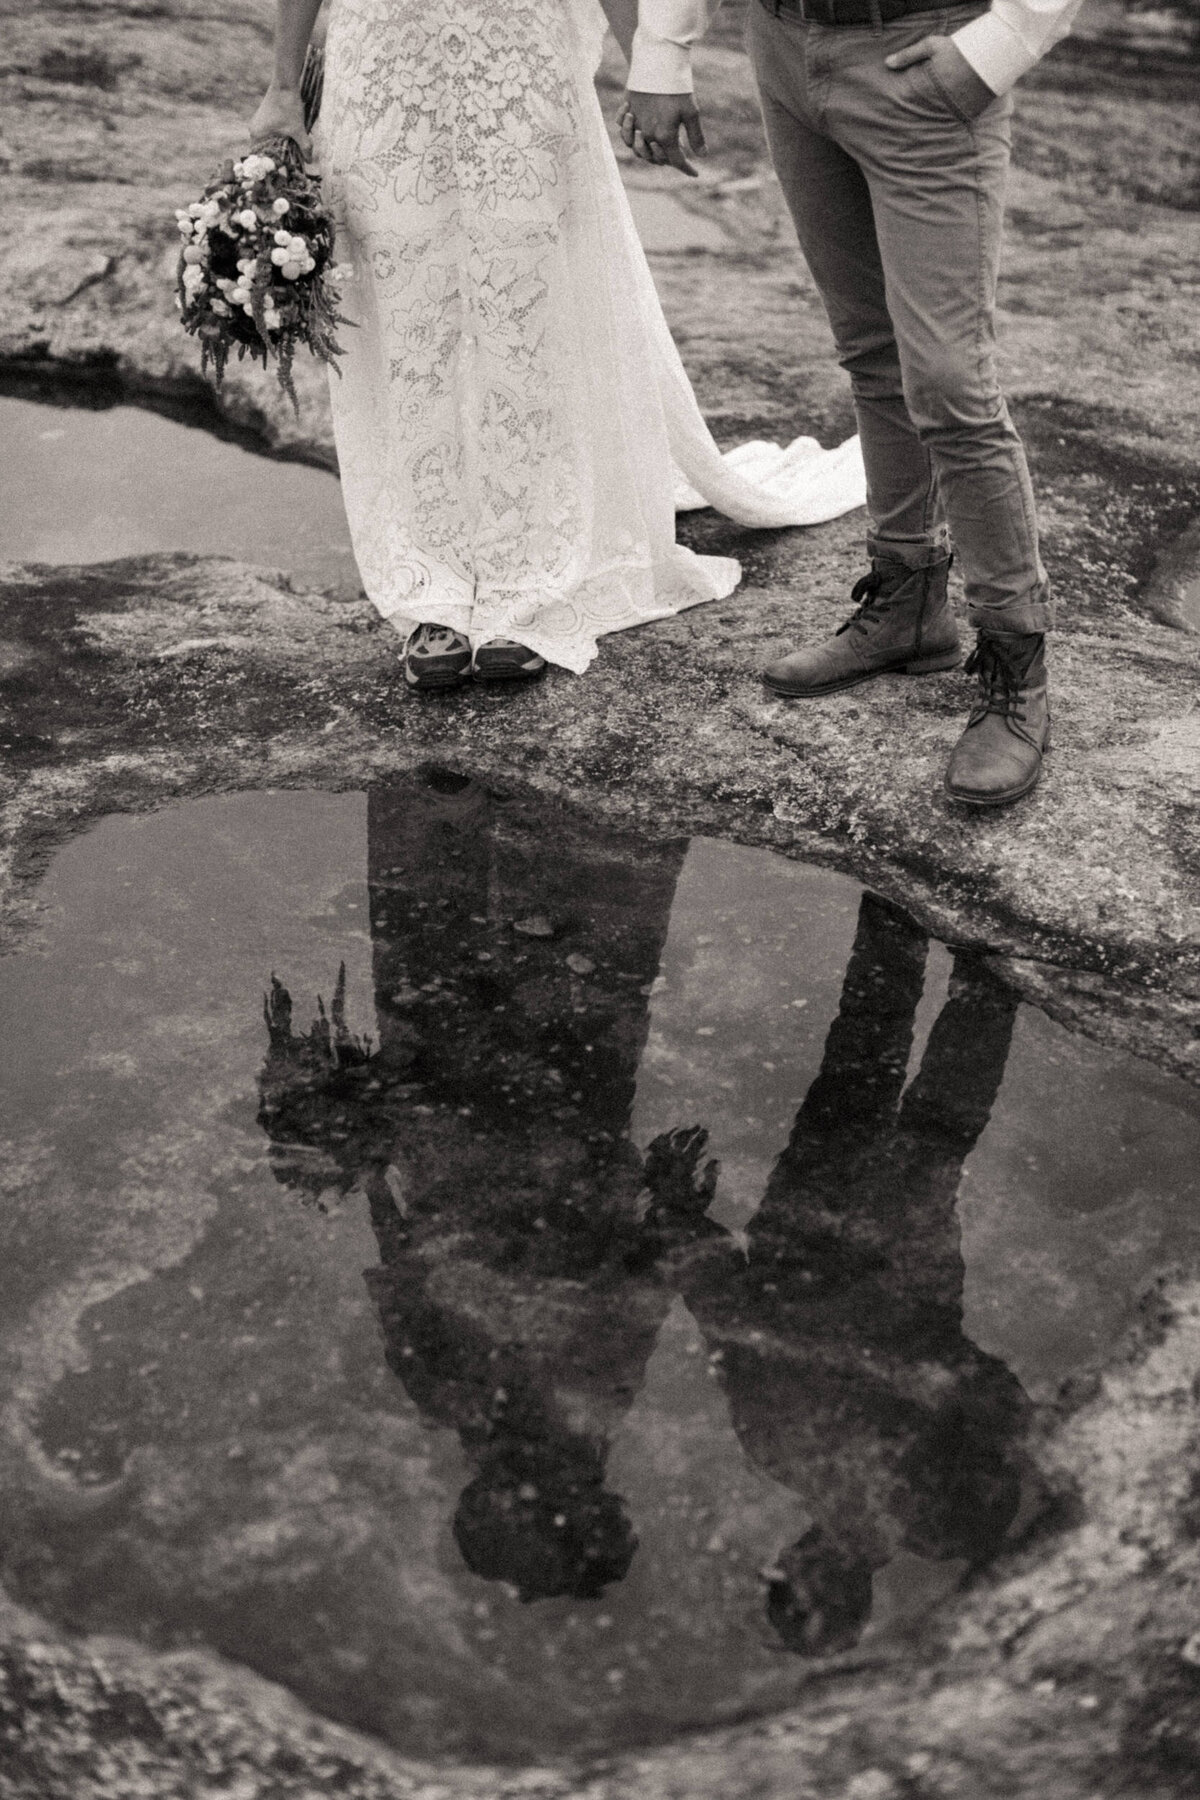 Reflection of bride holding bouquet and groom in water